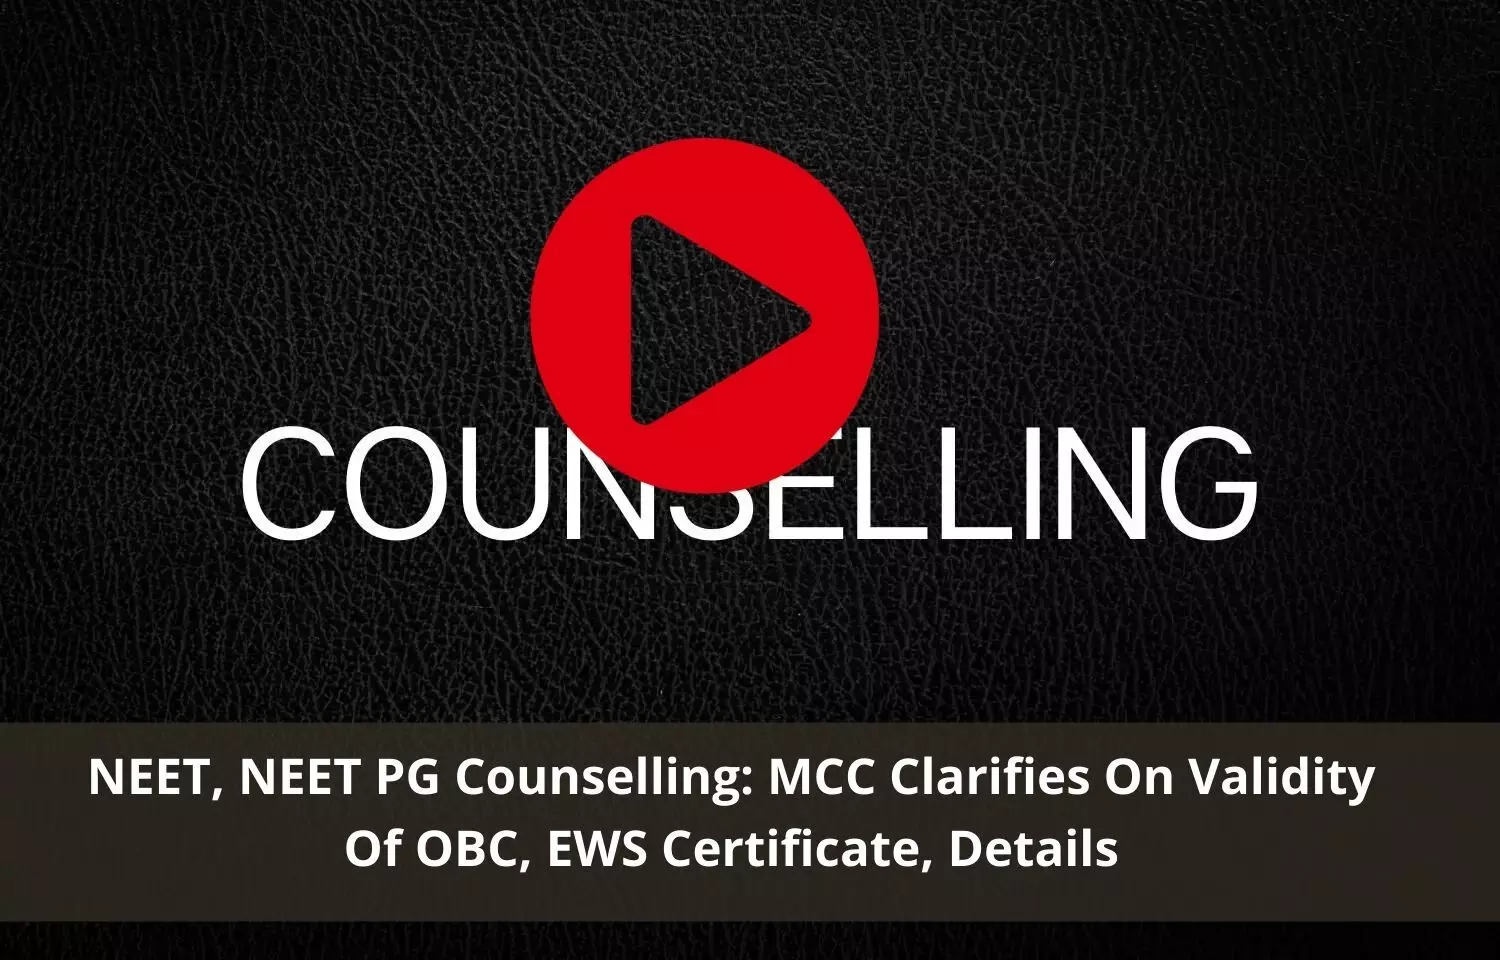 NEET, NEET PG Counselling 2021: MCC issues clarification on OBC, EWS certificates validity